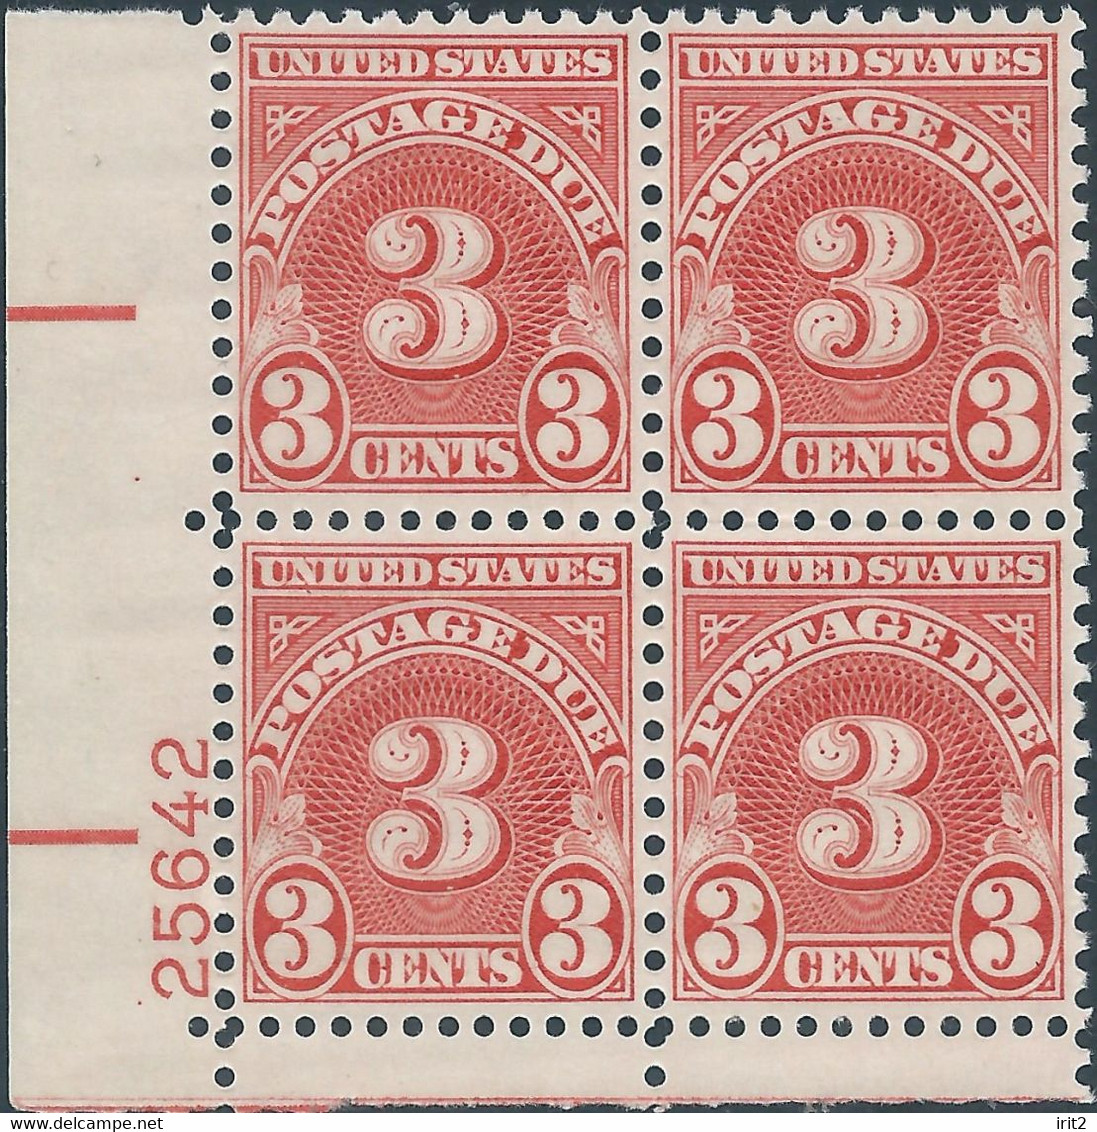 Stati Uniti D'america,United States,U.S.A, 1930 Revenue Stamps,Postage Due 3c In Block Of 4 With Sheet Margin, MNH - Taxe Sur Le Port